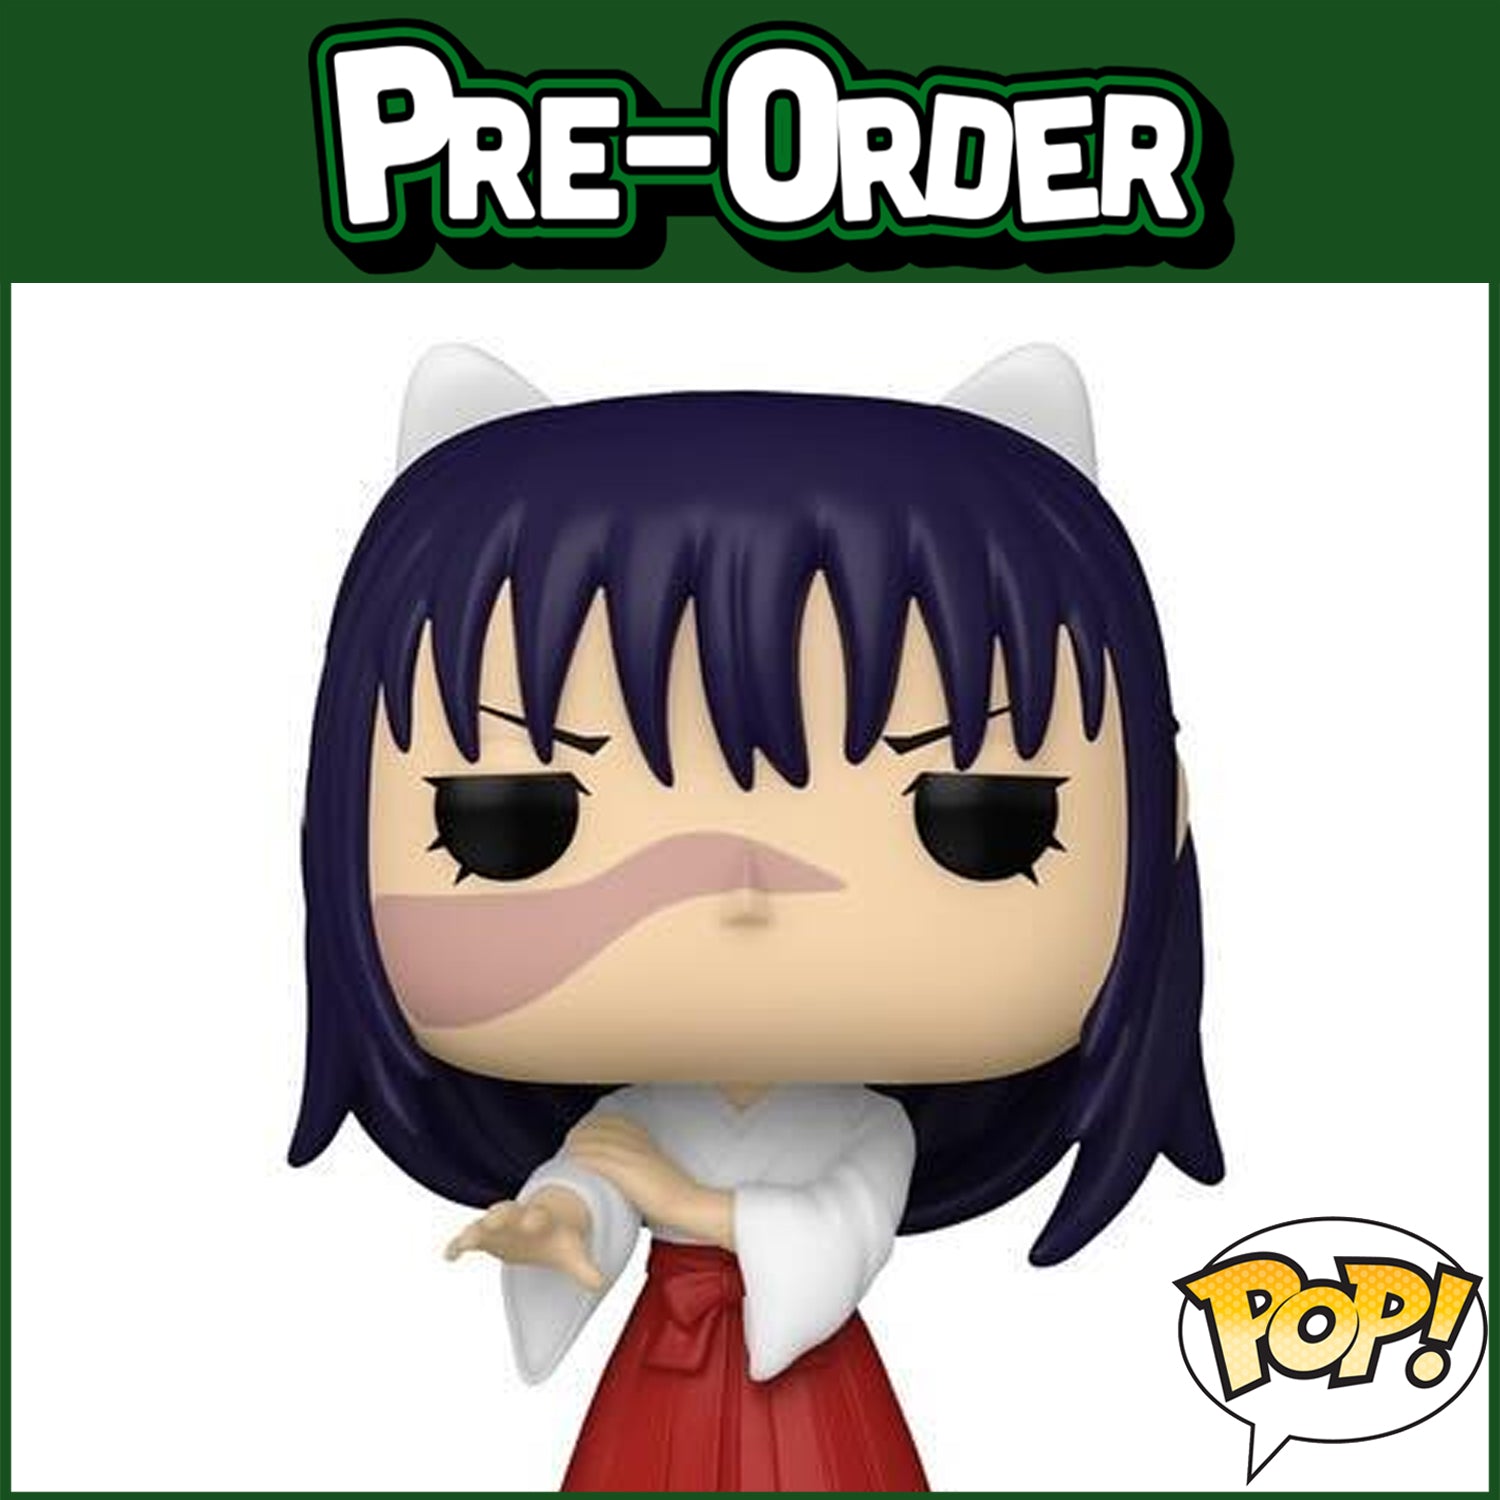 PRE ORDER – Page 3 – Bully Collectibles